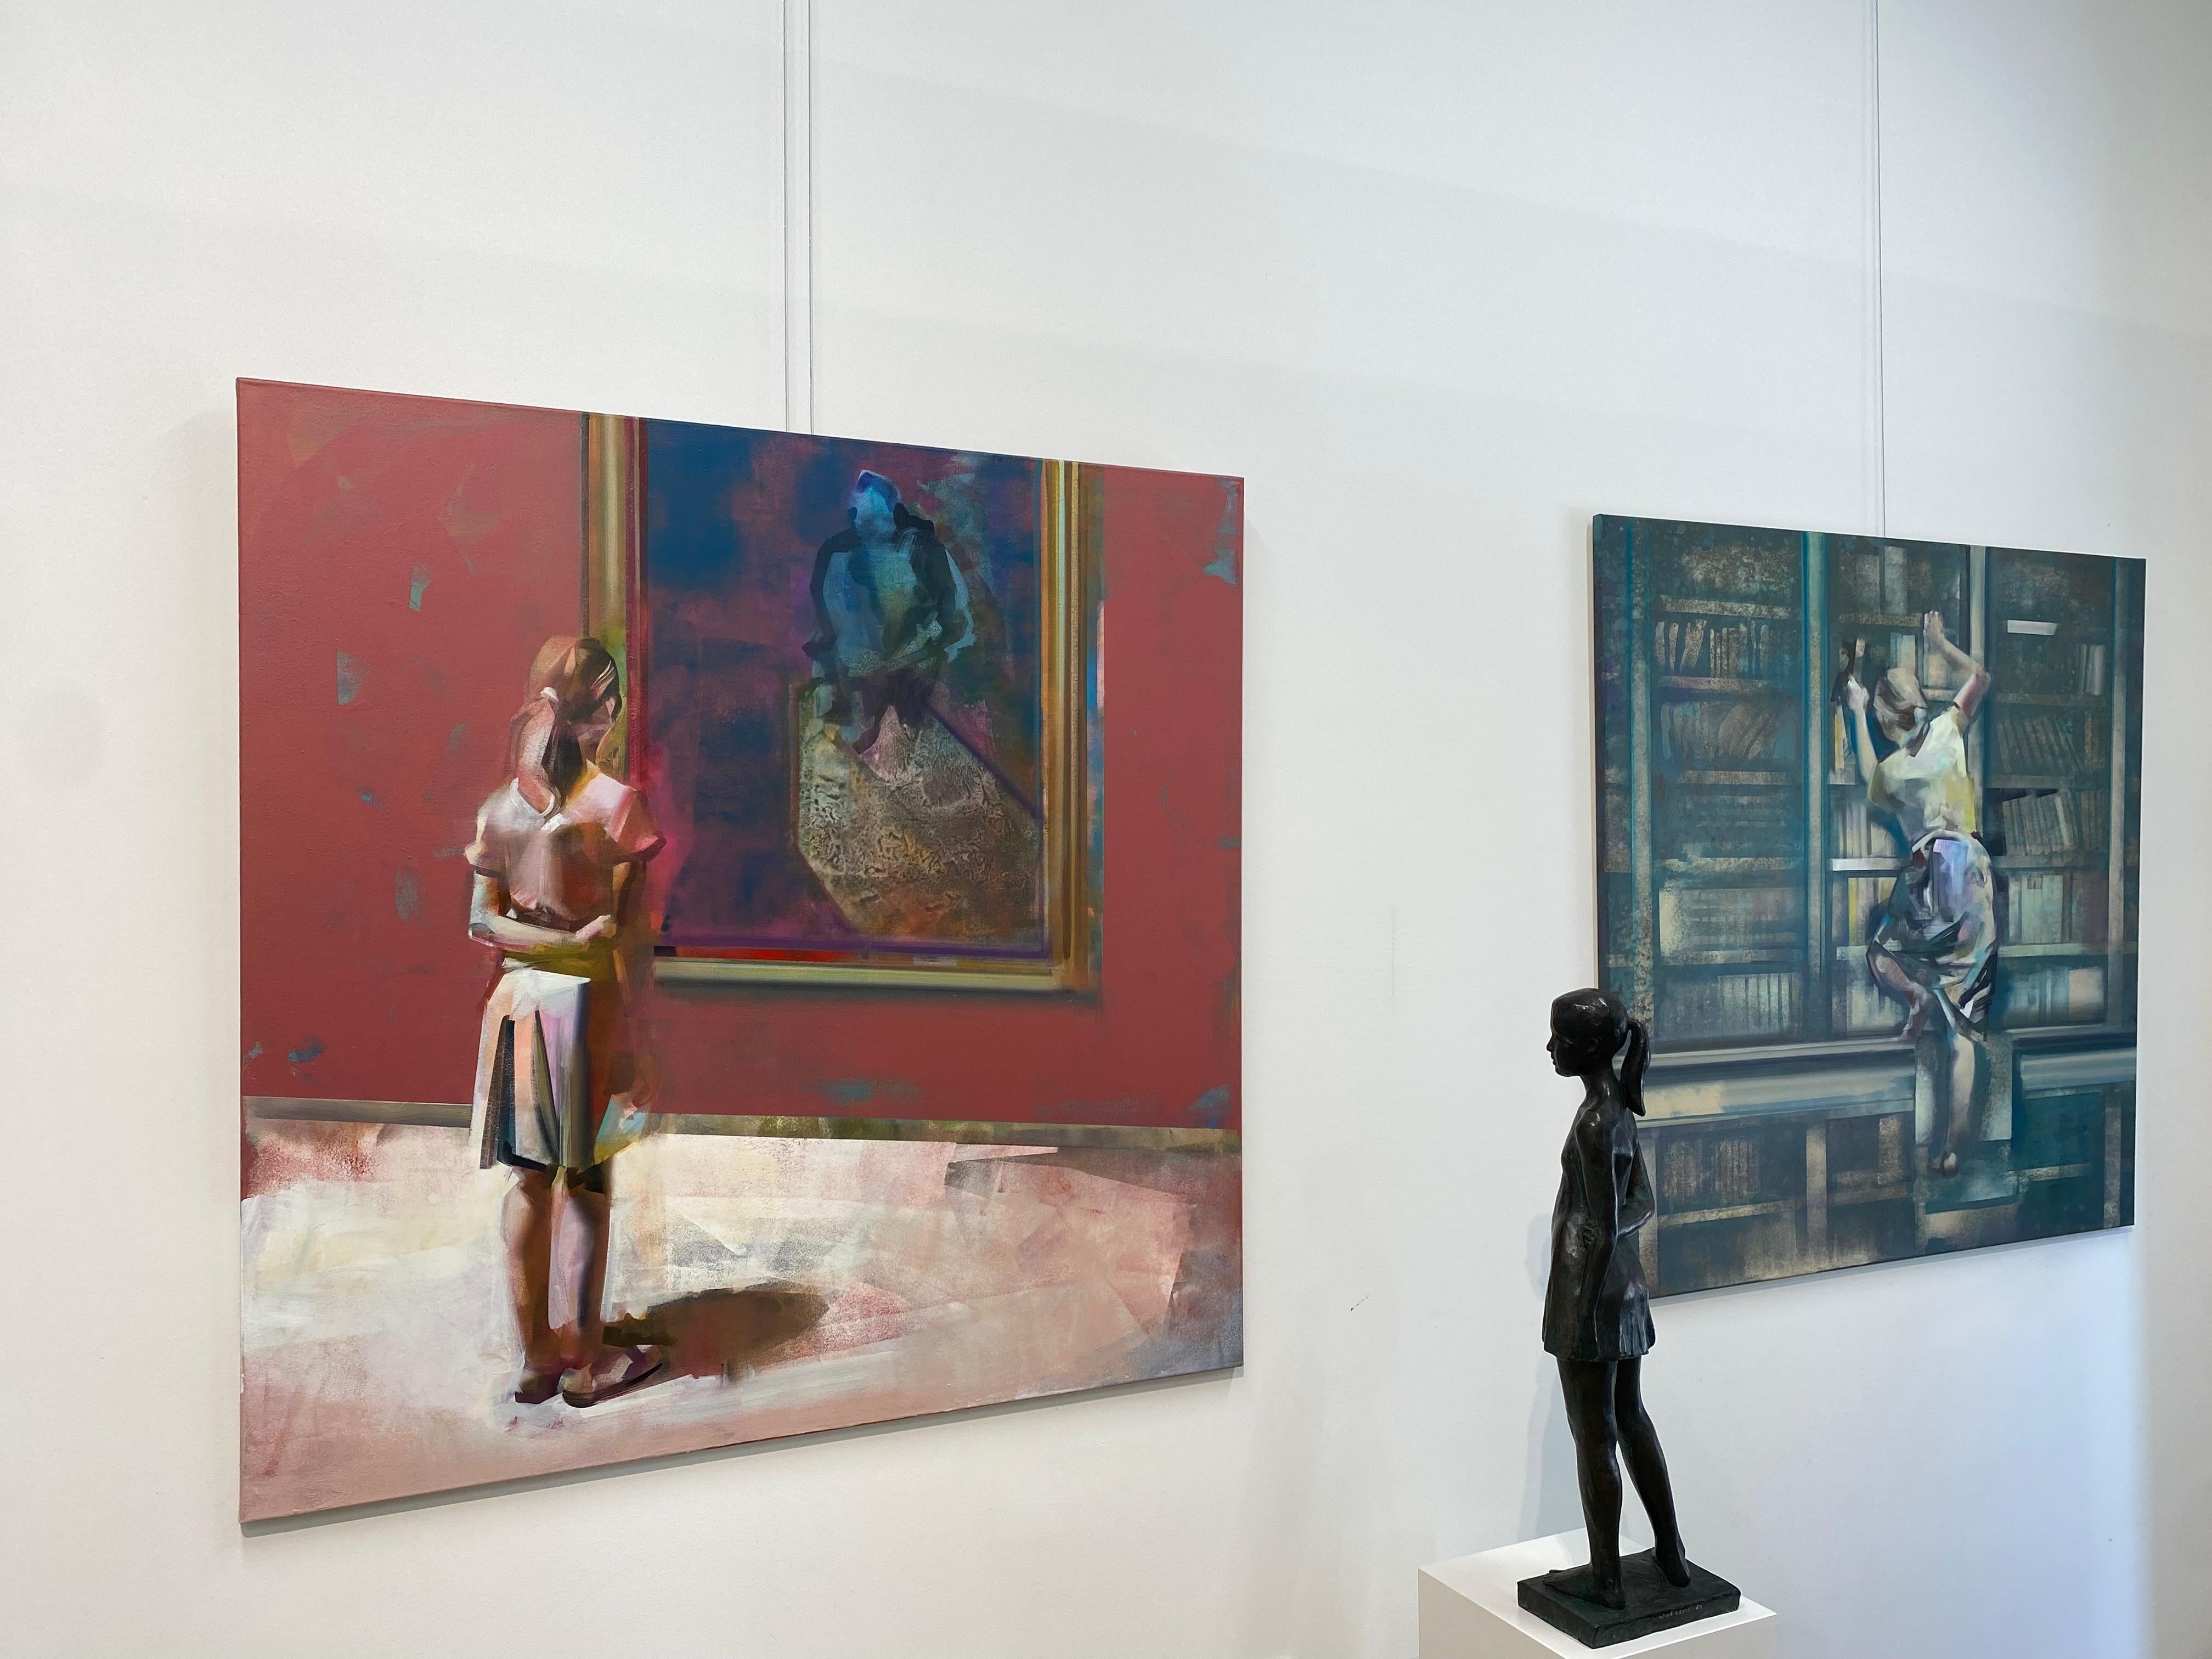 Marjolein
76 x 26 x 15 cm
Bronze

The theme van der Kraan likes most is to show the growing of young girls. Living in their own world. Like this girl watching something she likes. The narrative sculptures show 'the woman' and 'the girl' withdrawn